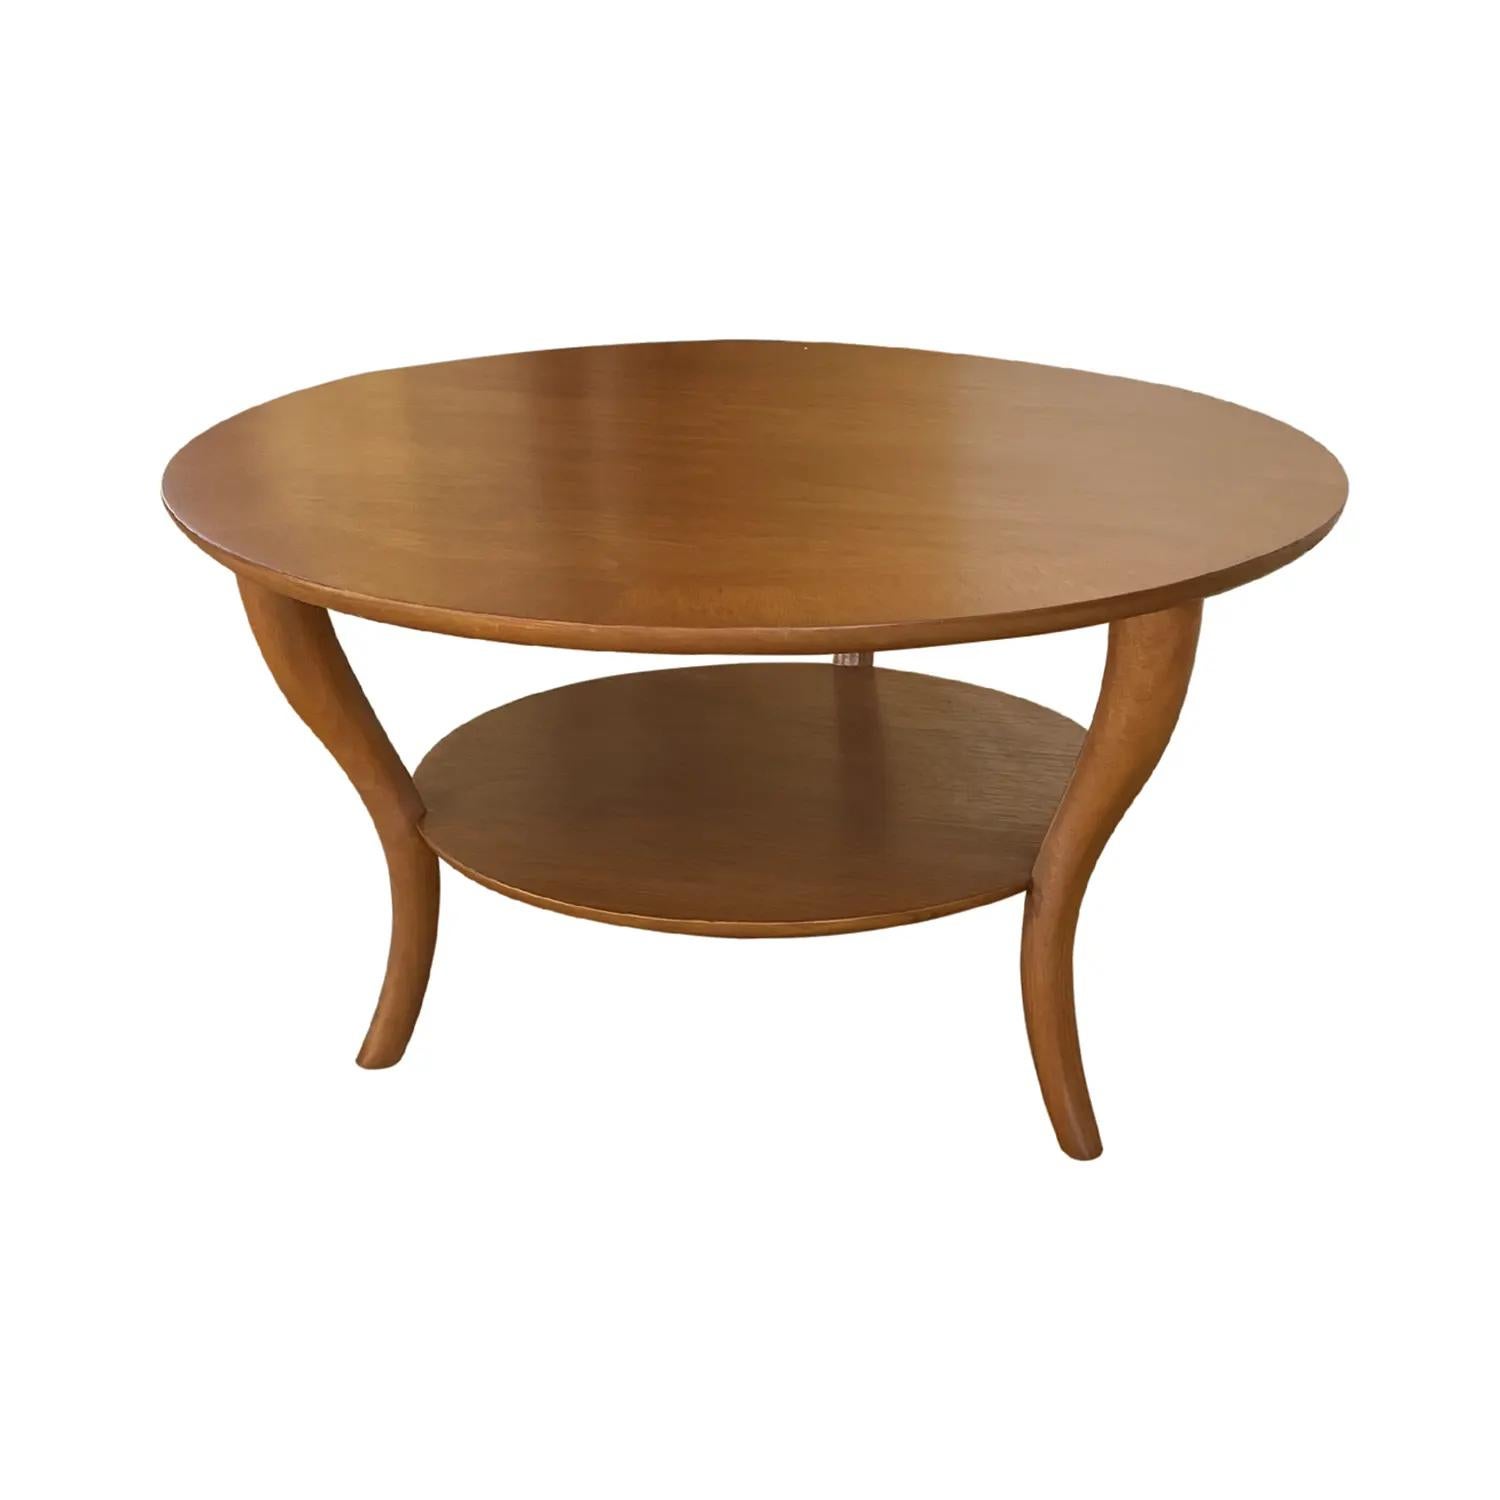 Hand-Carved 20th Century American Widdicomb Walnut Cocktail Table by T.H. Robsjohn-Gibbings For Sale